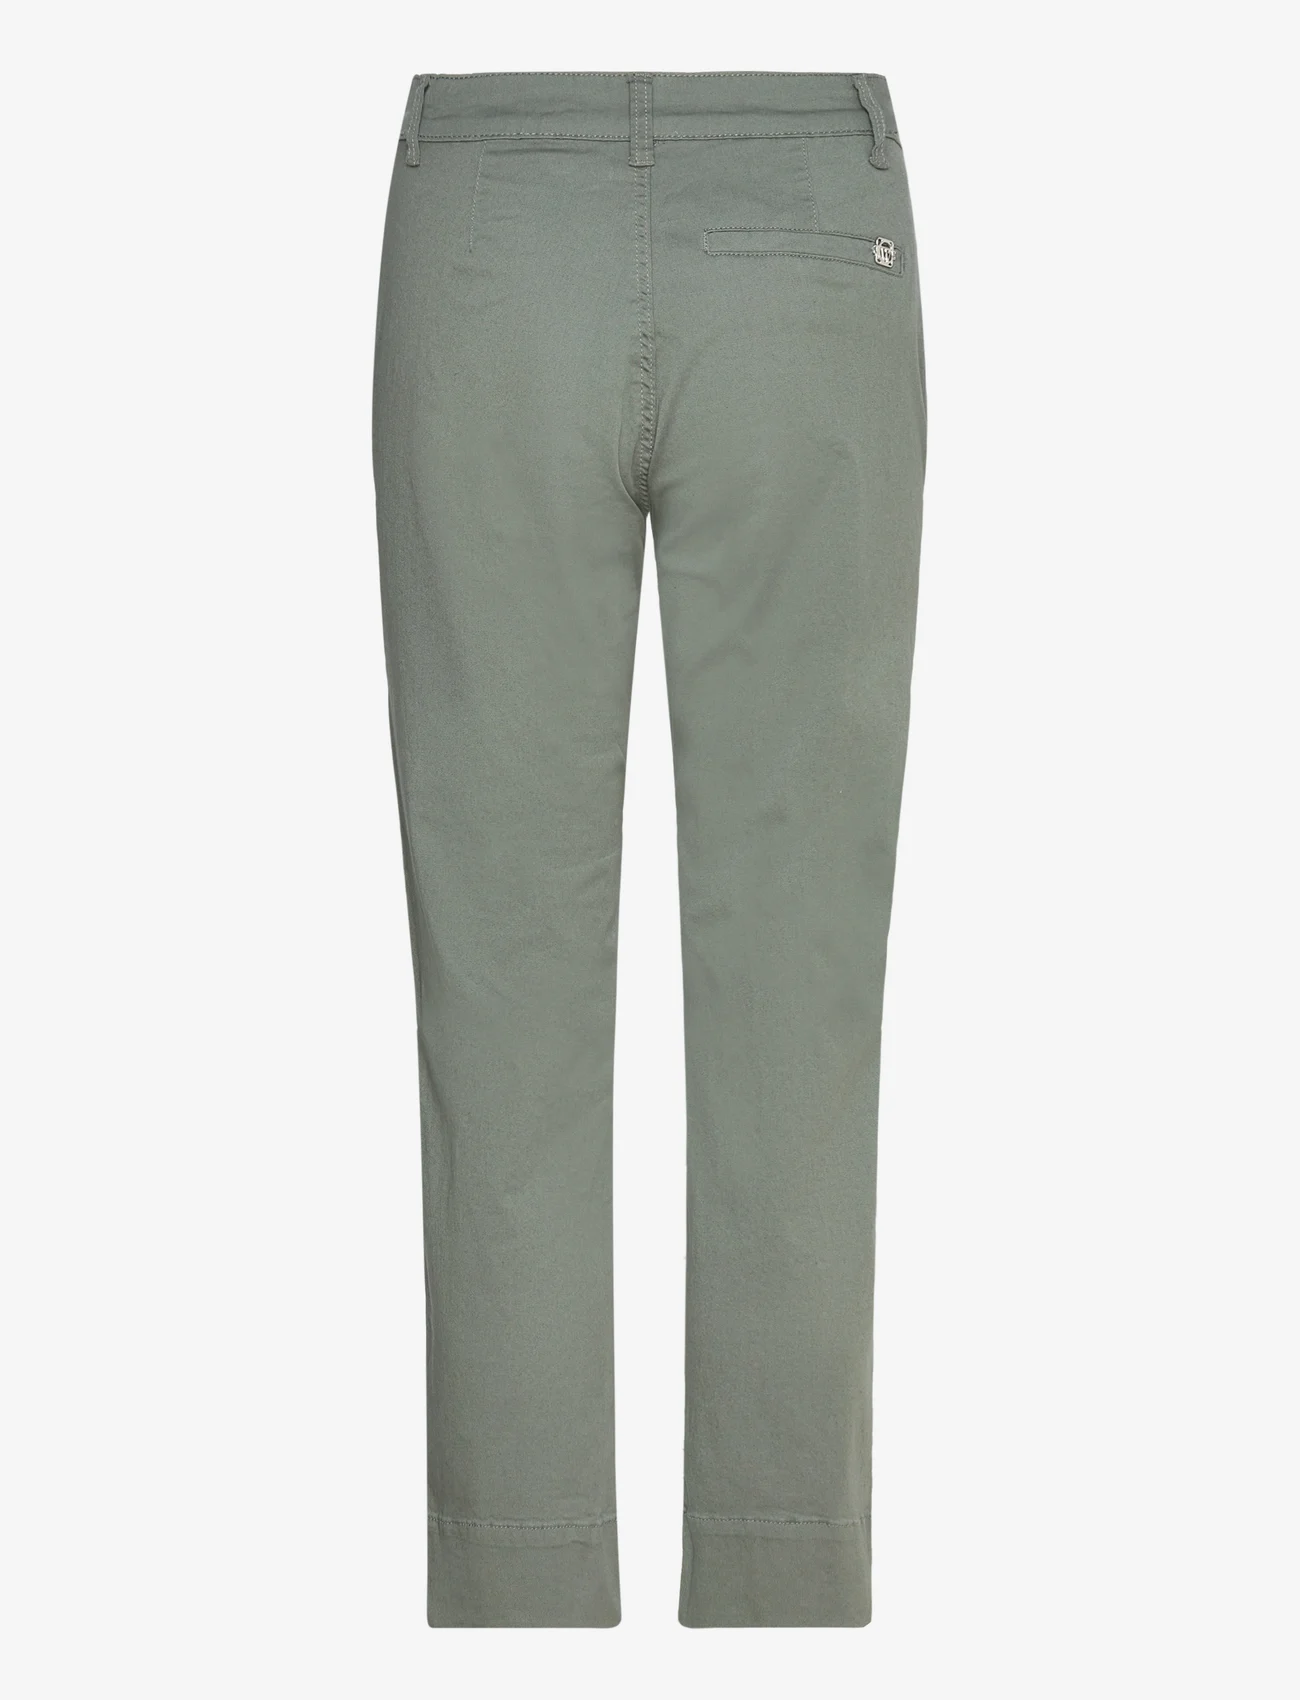 Claire Woman - Thareza - Trousers - chinos - olive dust - 1